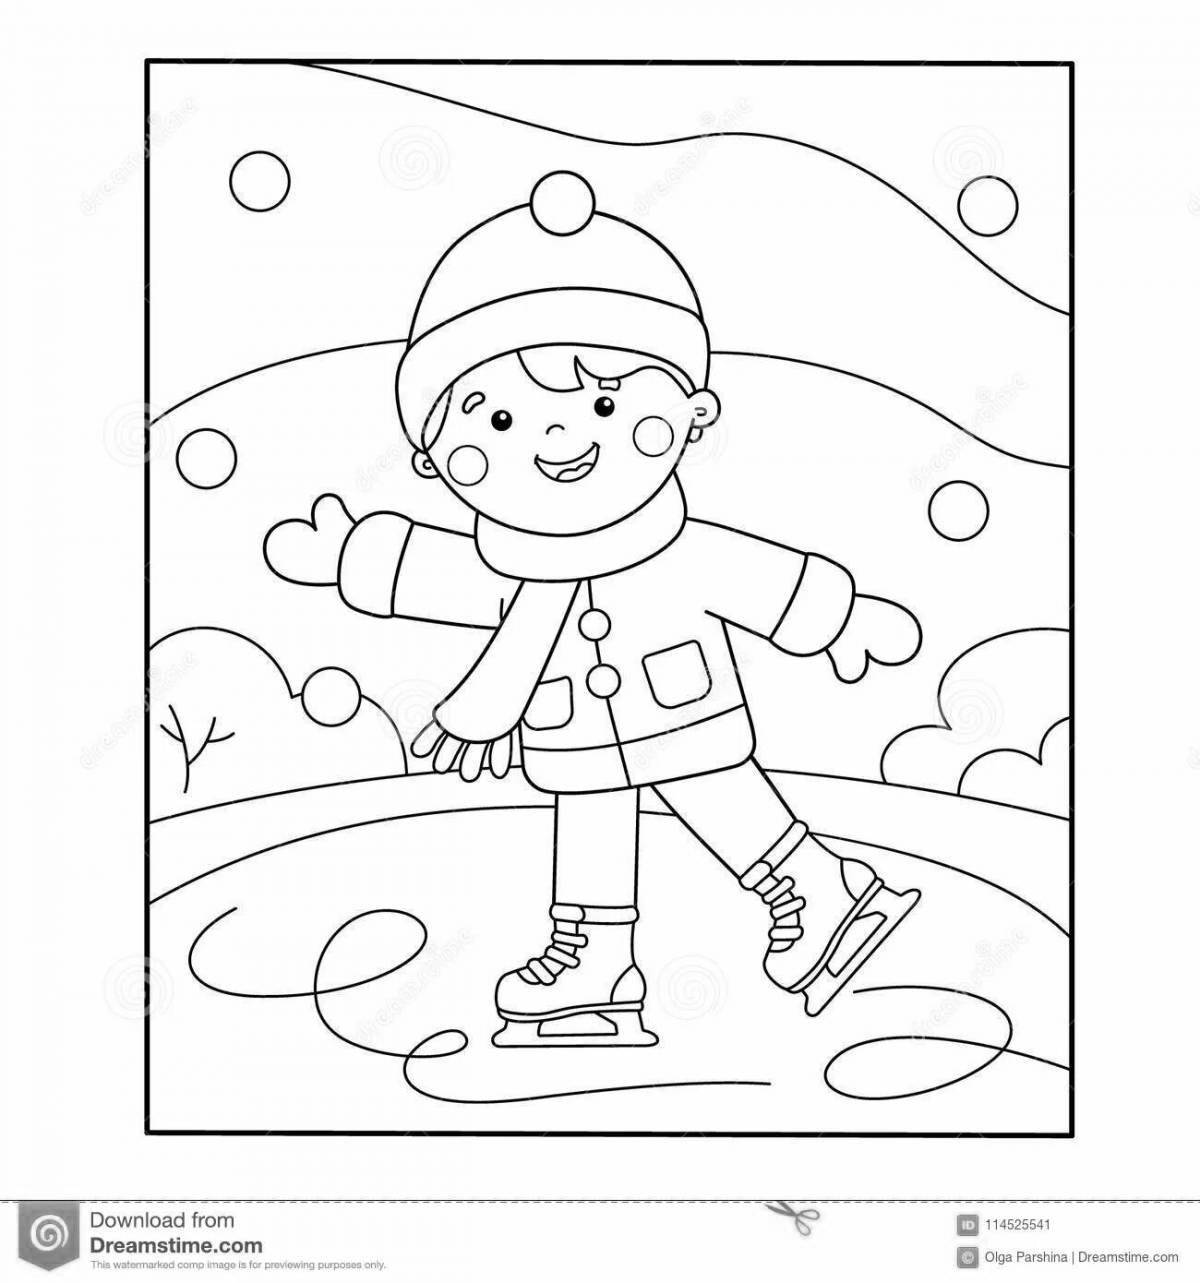 Joyful sports coloring book for 3-4 year olds